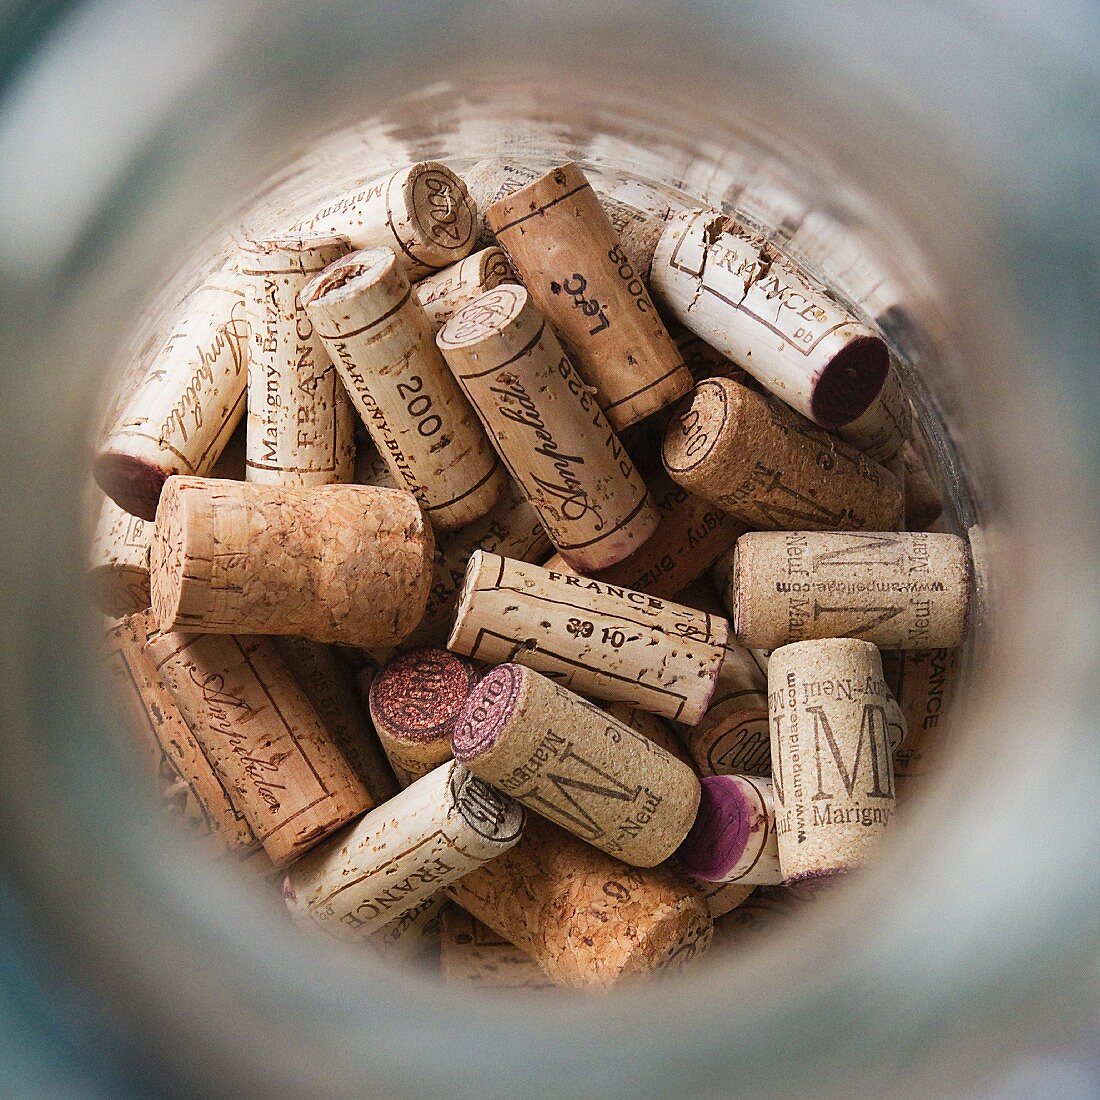 Corks in a glass container